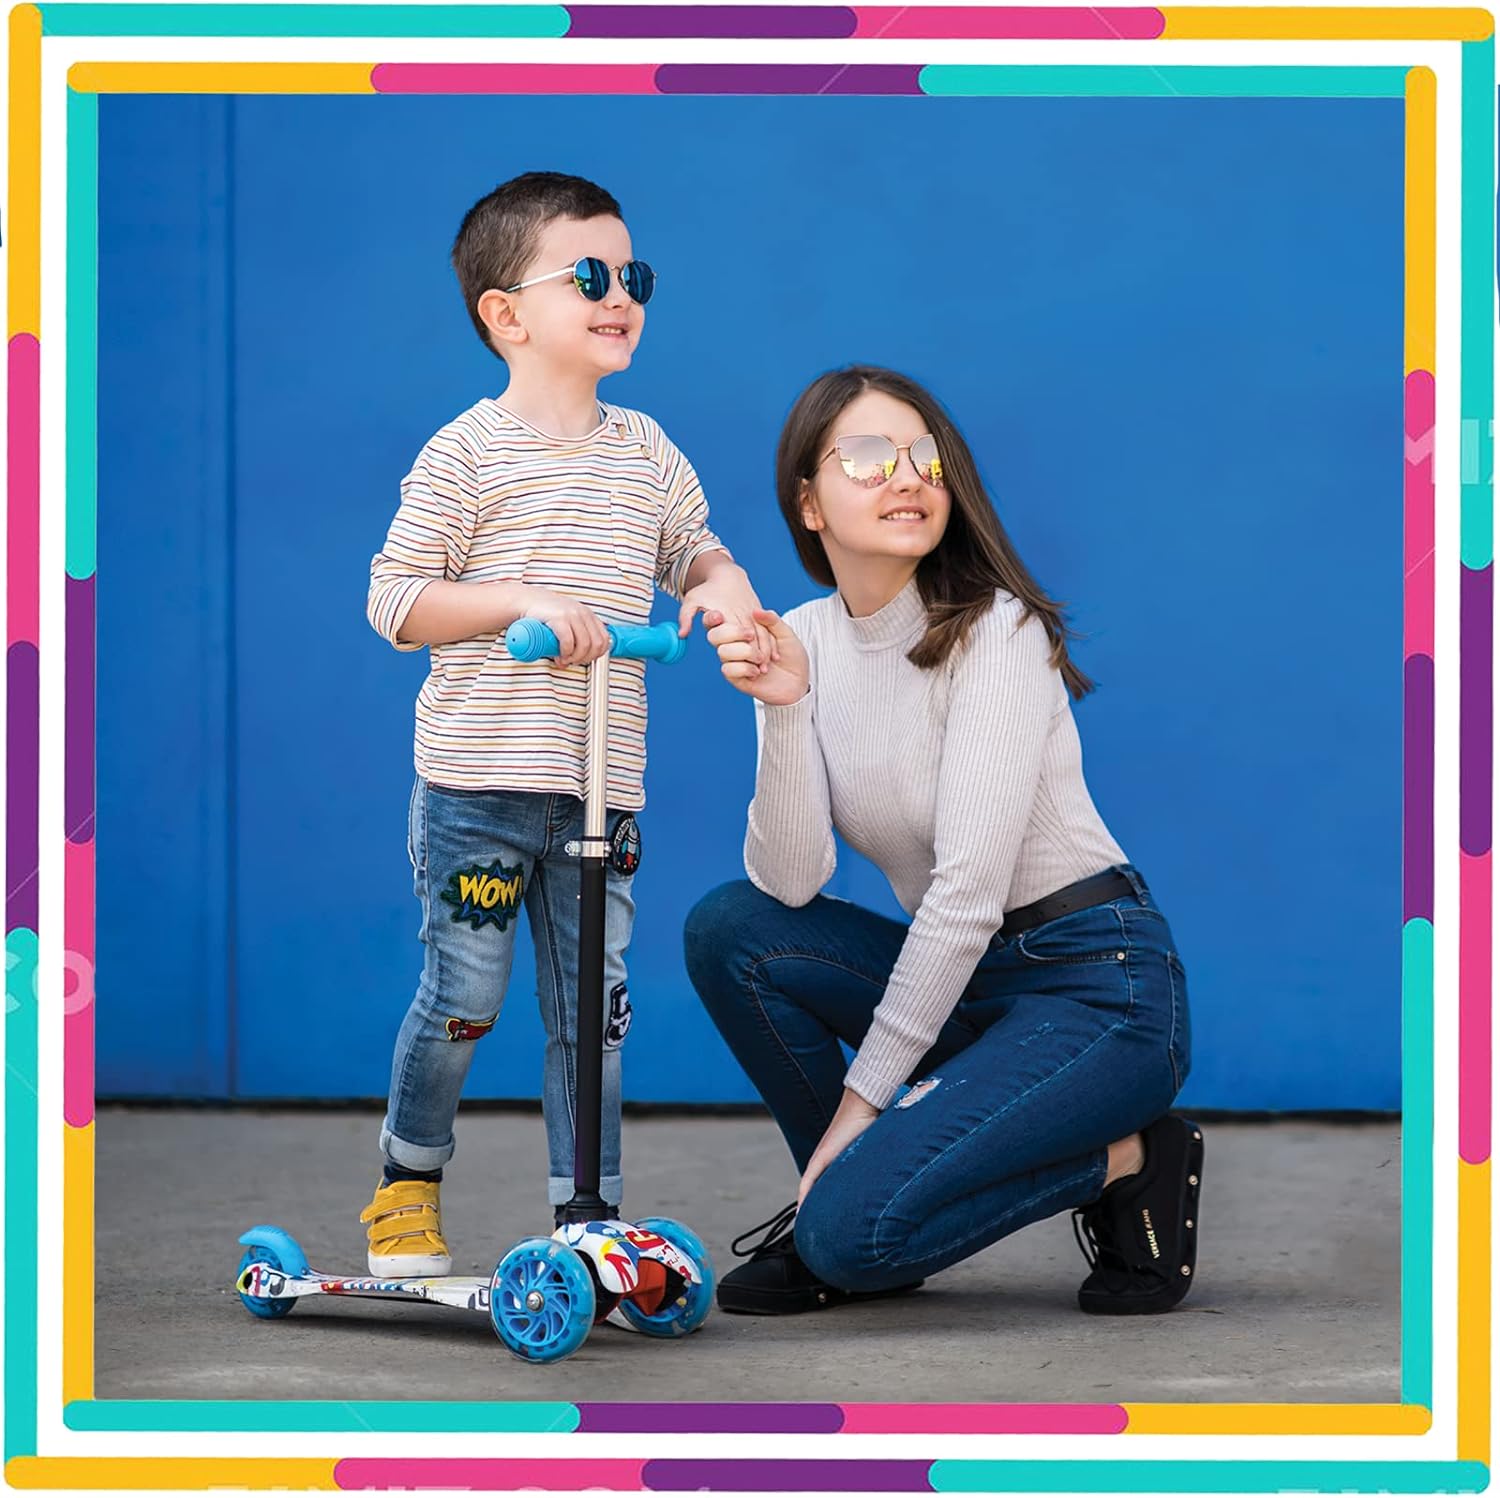 DADDYCHILD Scooter for Kids Review